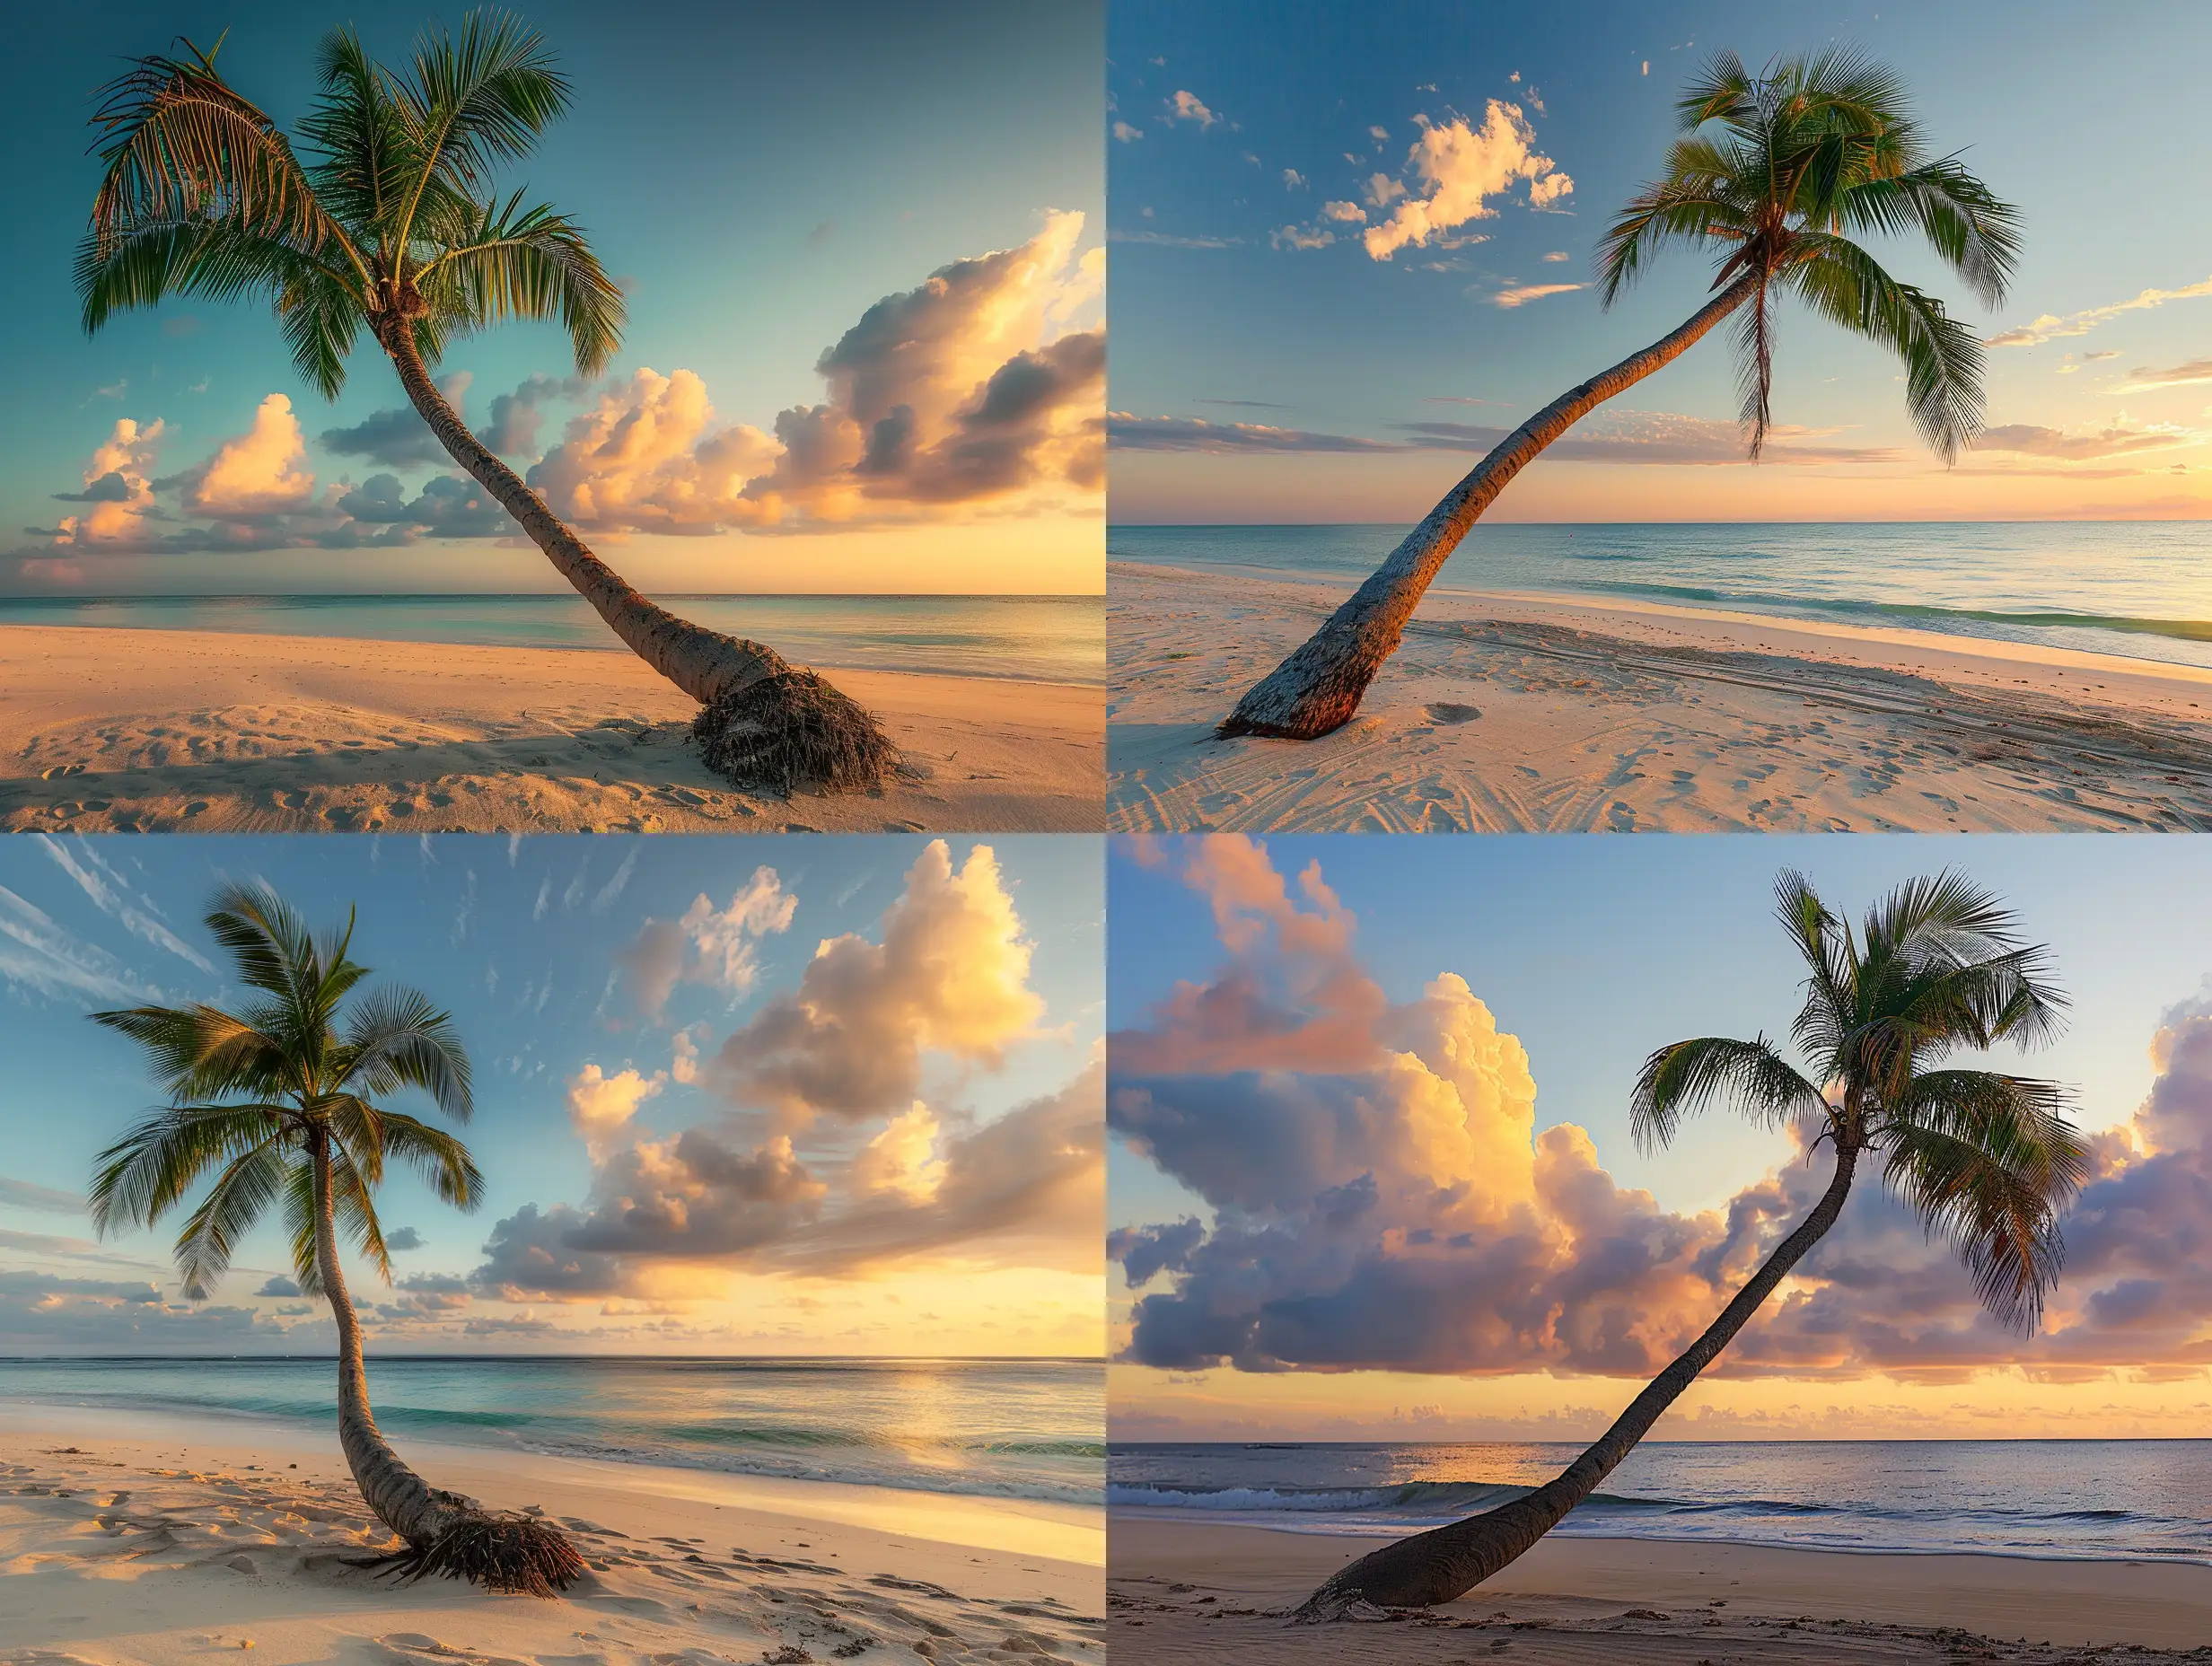 A beautiful strangely bent palm tree on tropical beach at Golden hour, stunning photography